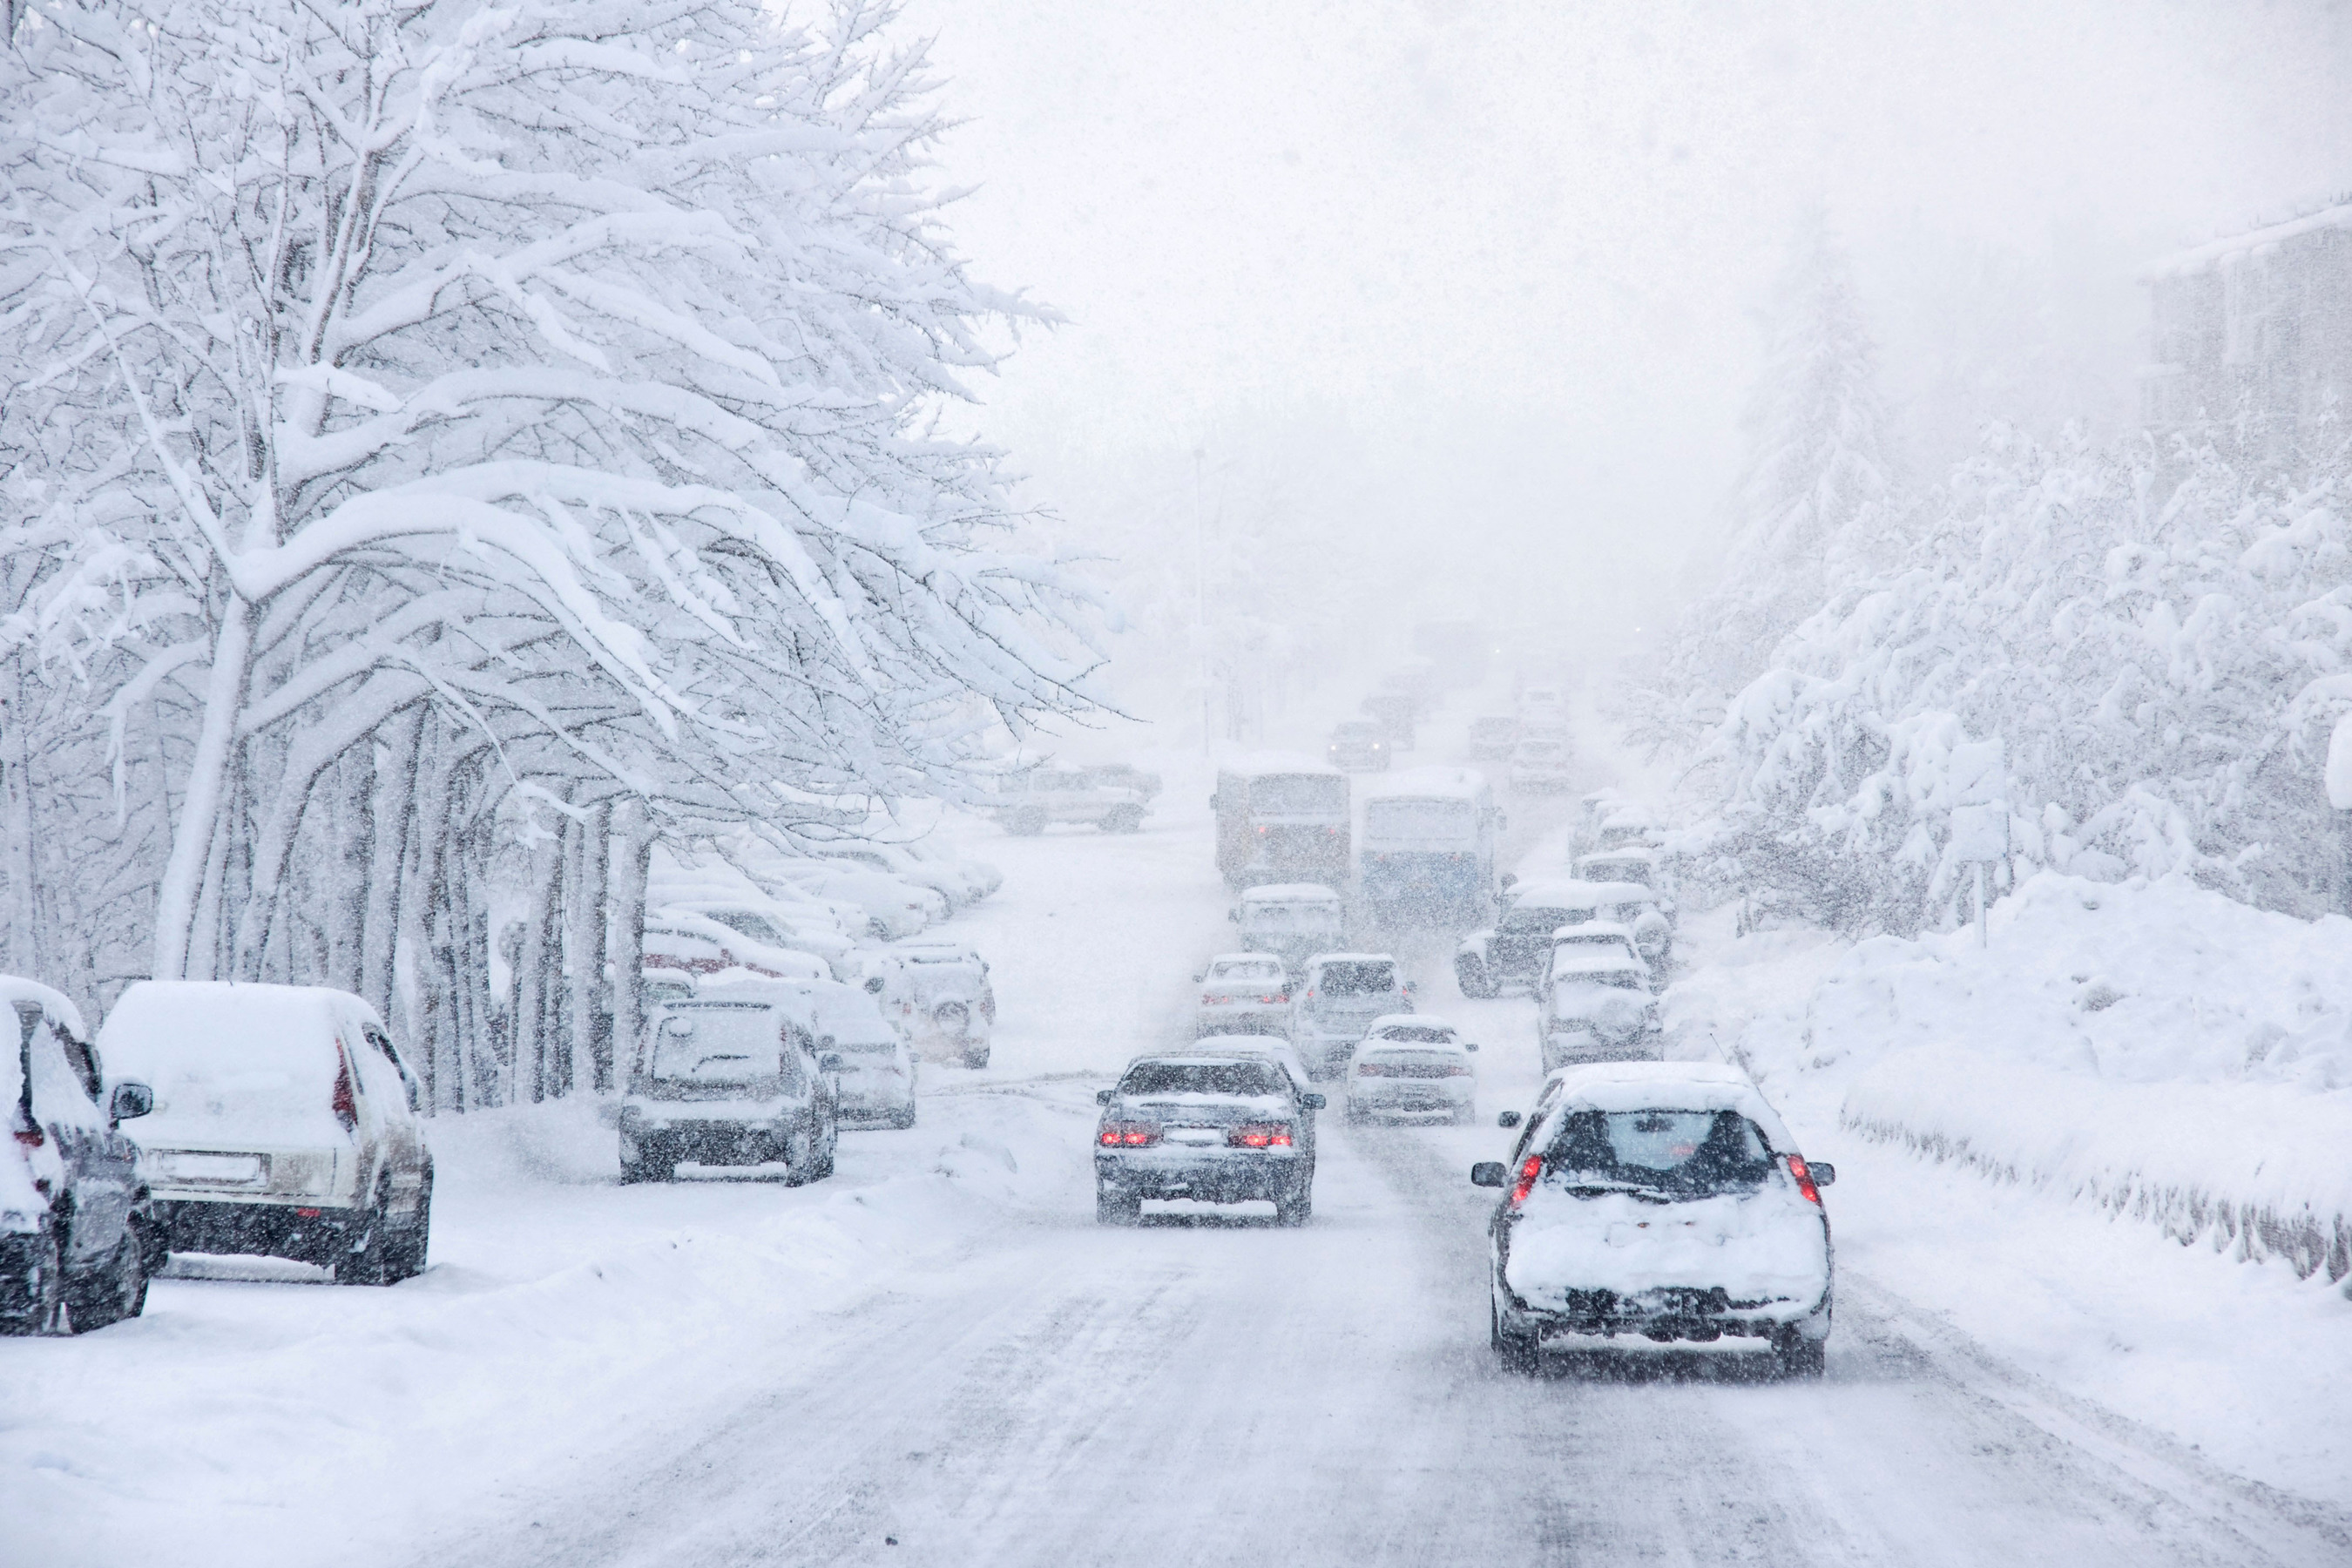 Discount Tire recommends replacing your all-season tires with winter tires for driving in temperatures 45 degrees or below. (PRNewsFoto/Discount Tire) (PRNewsFoto/DISCOUNT TIRE)